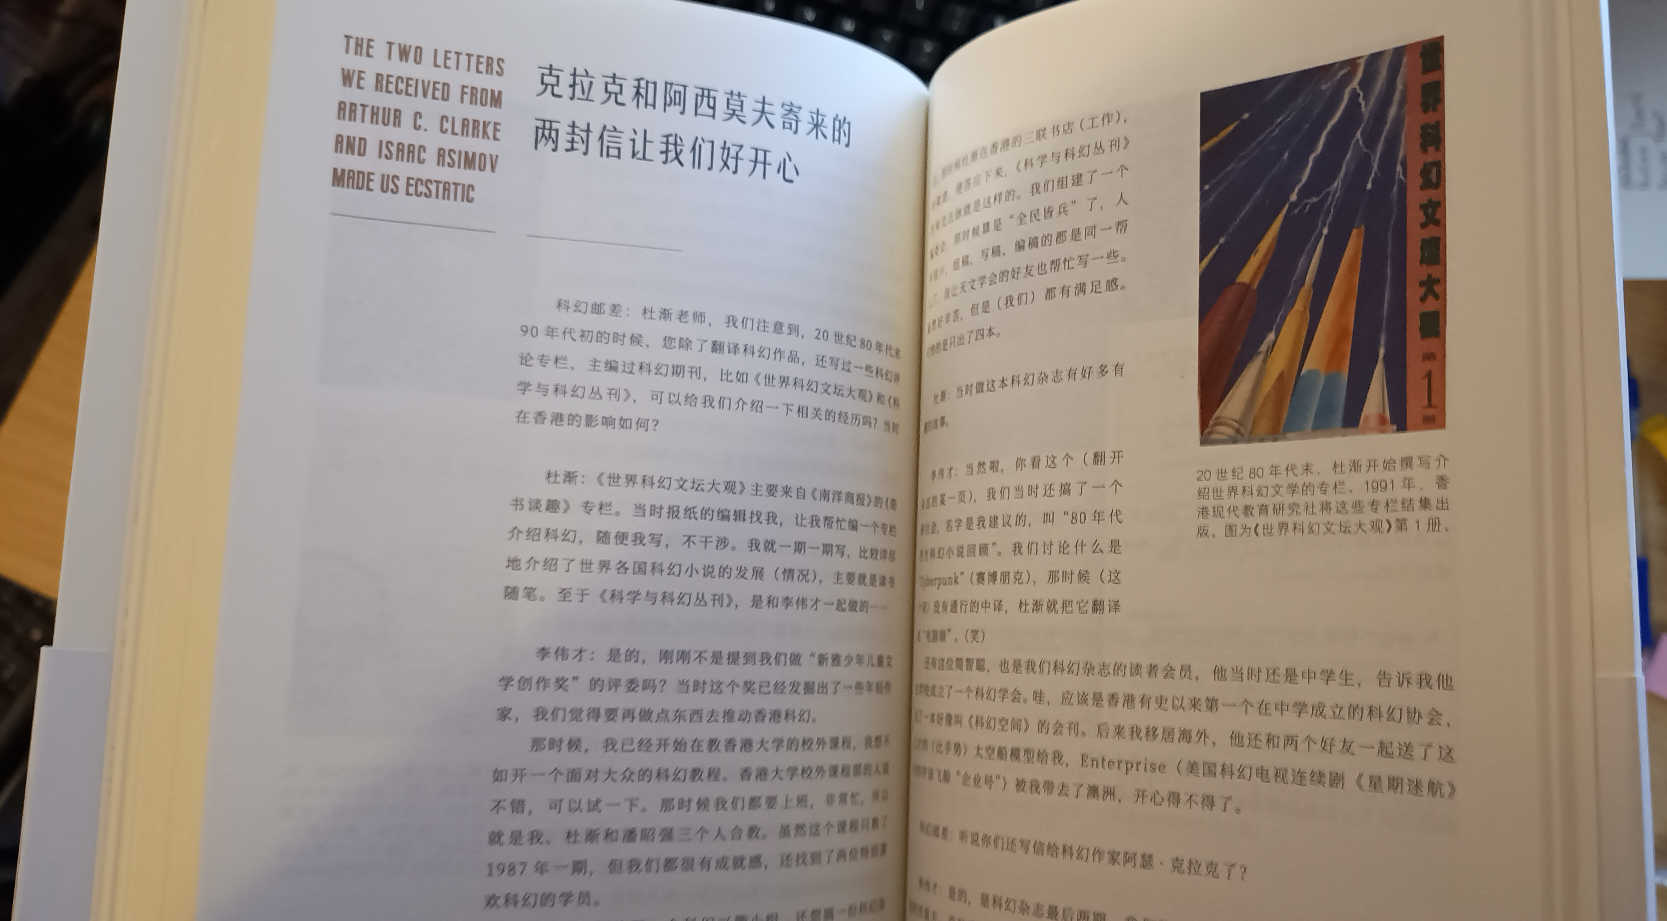 A spread from Chinese SF: An Oral History - Volume 3